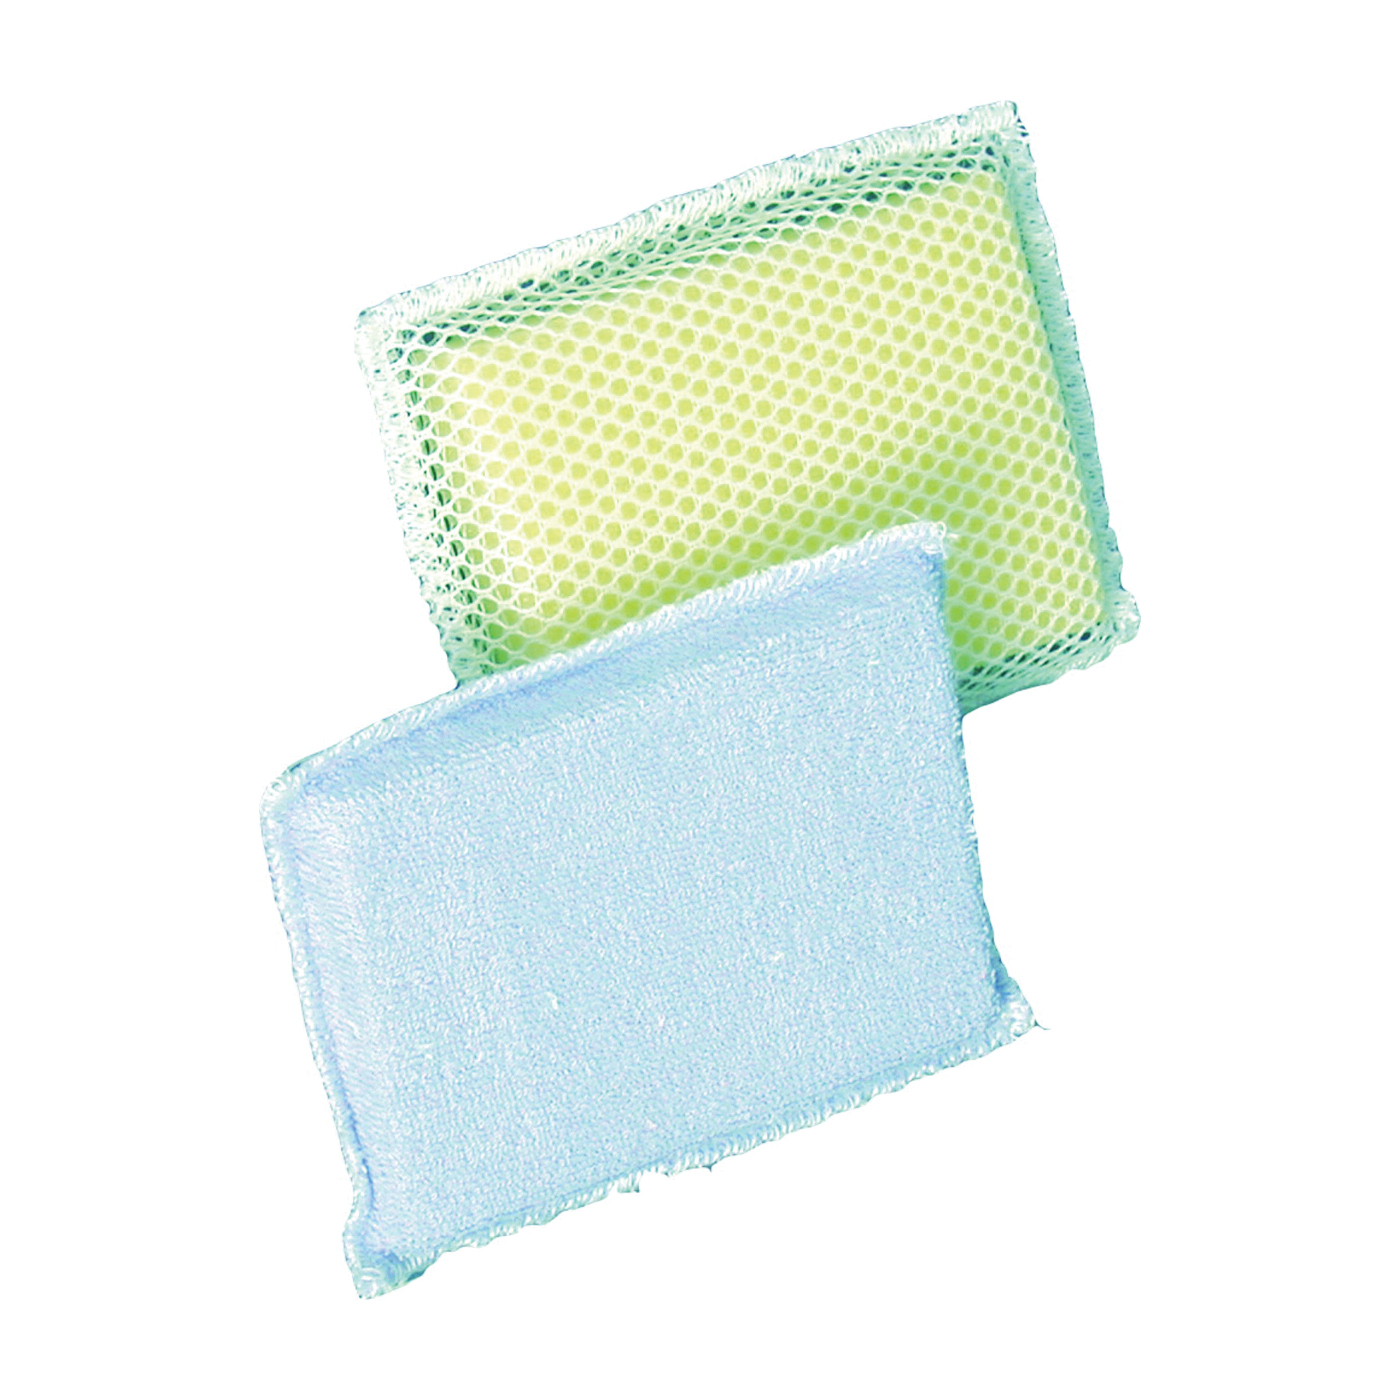 353-24 Scouring Sponge, 6-1/4 in L, 4 in W, 3/4 in Thick, Terry Cloth